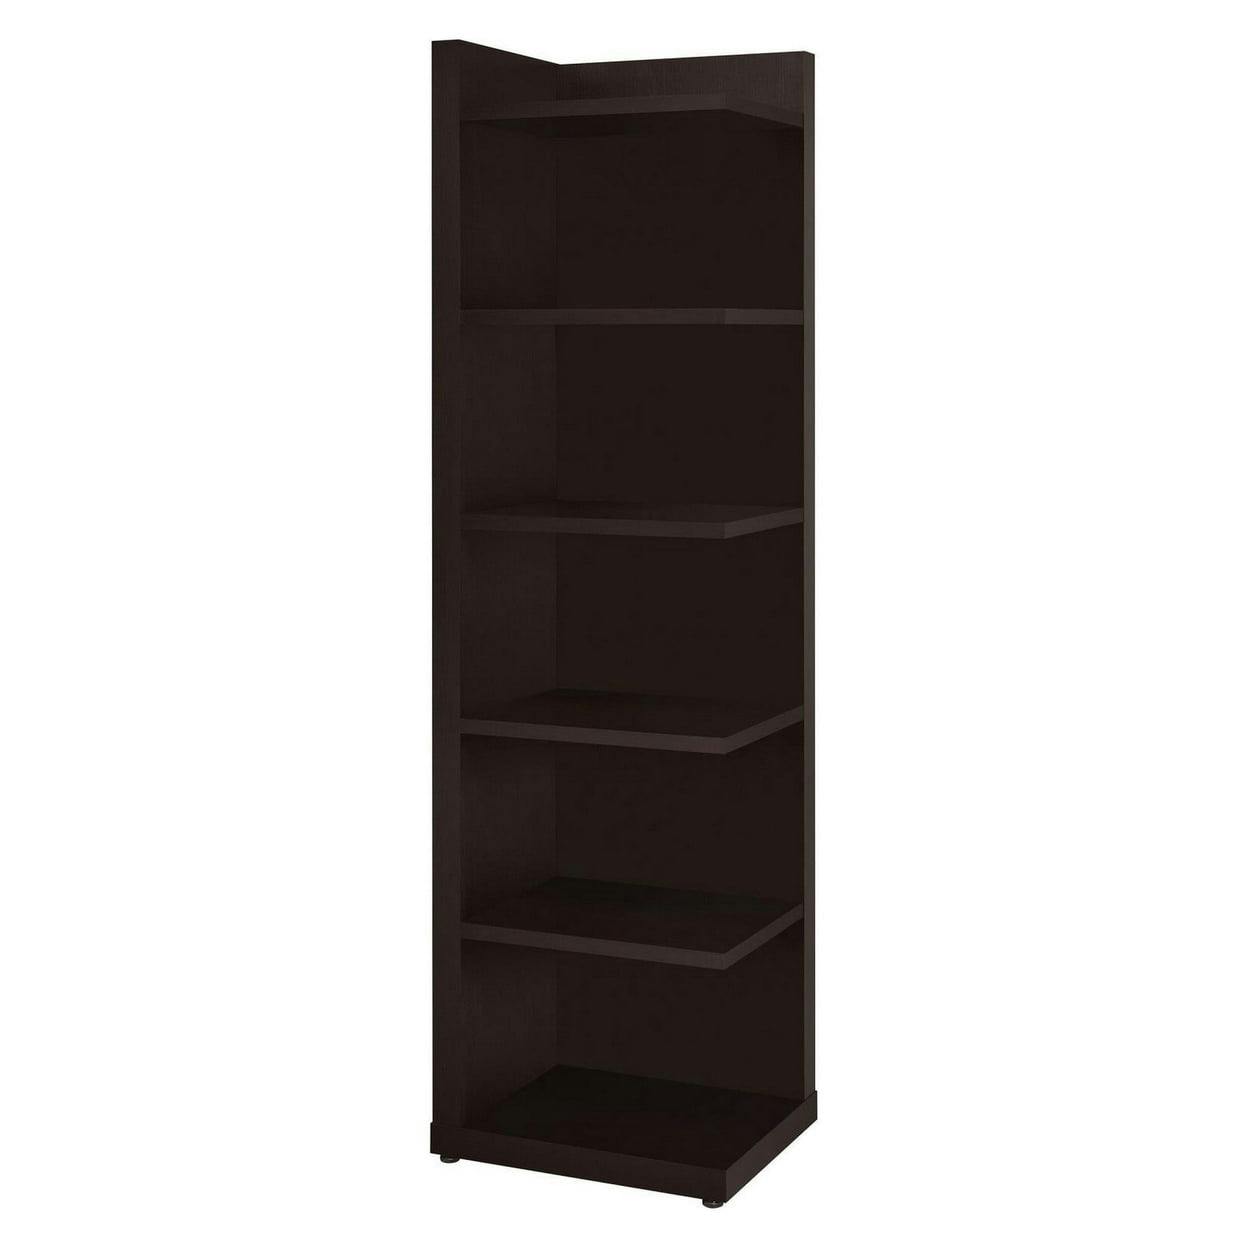 Transitional Cappuccino Brown Corner Bookcase with Adjustable Shelves